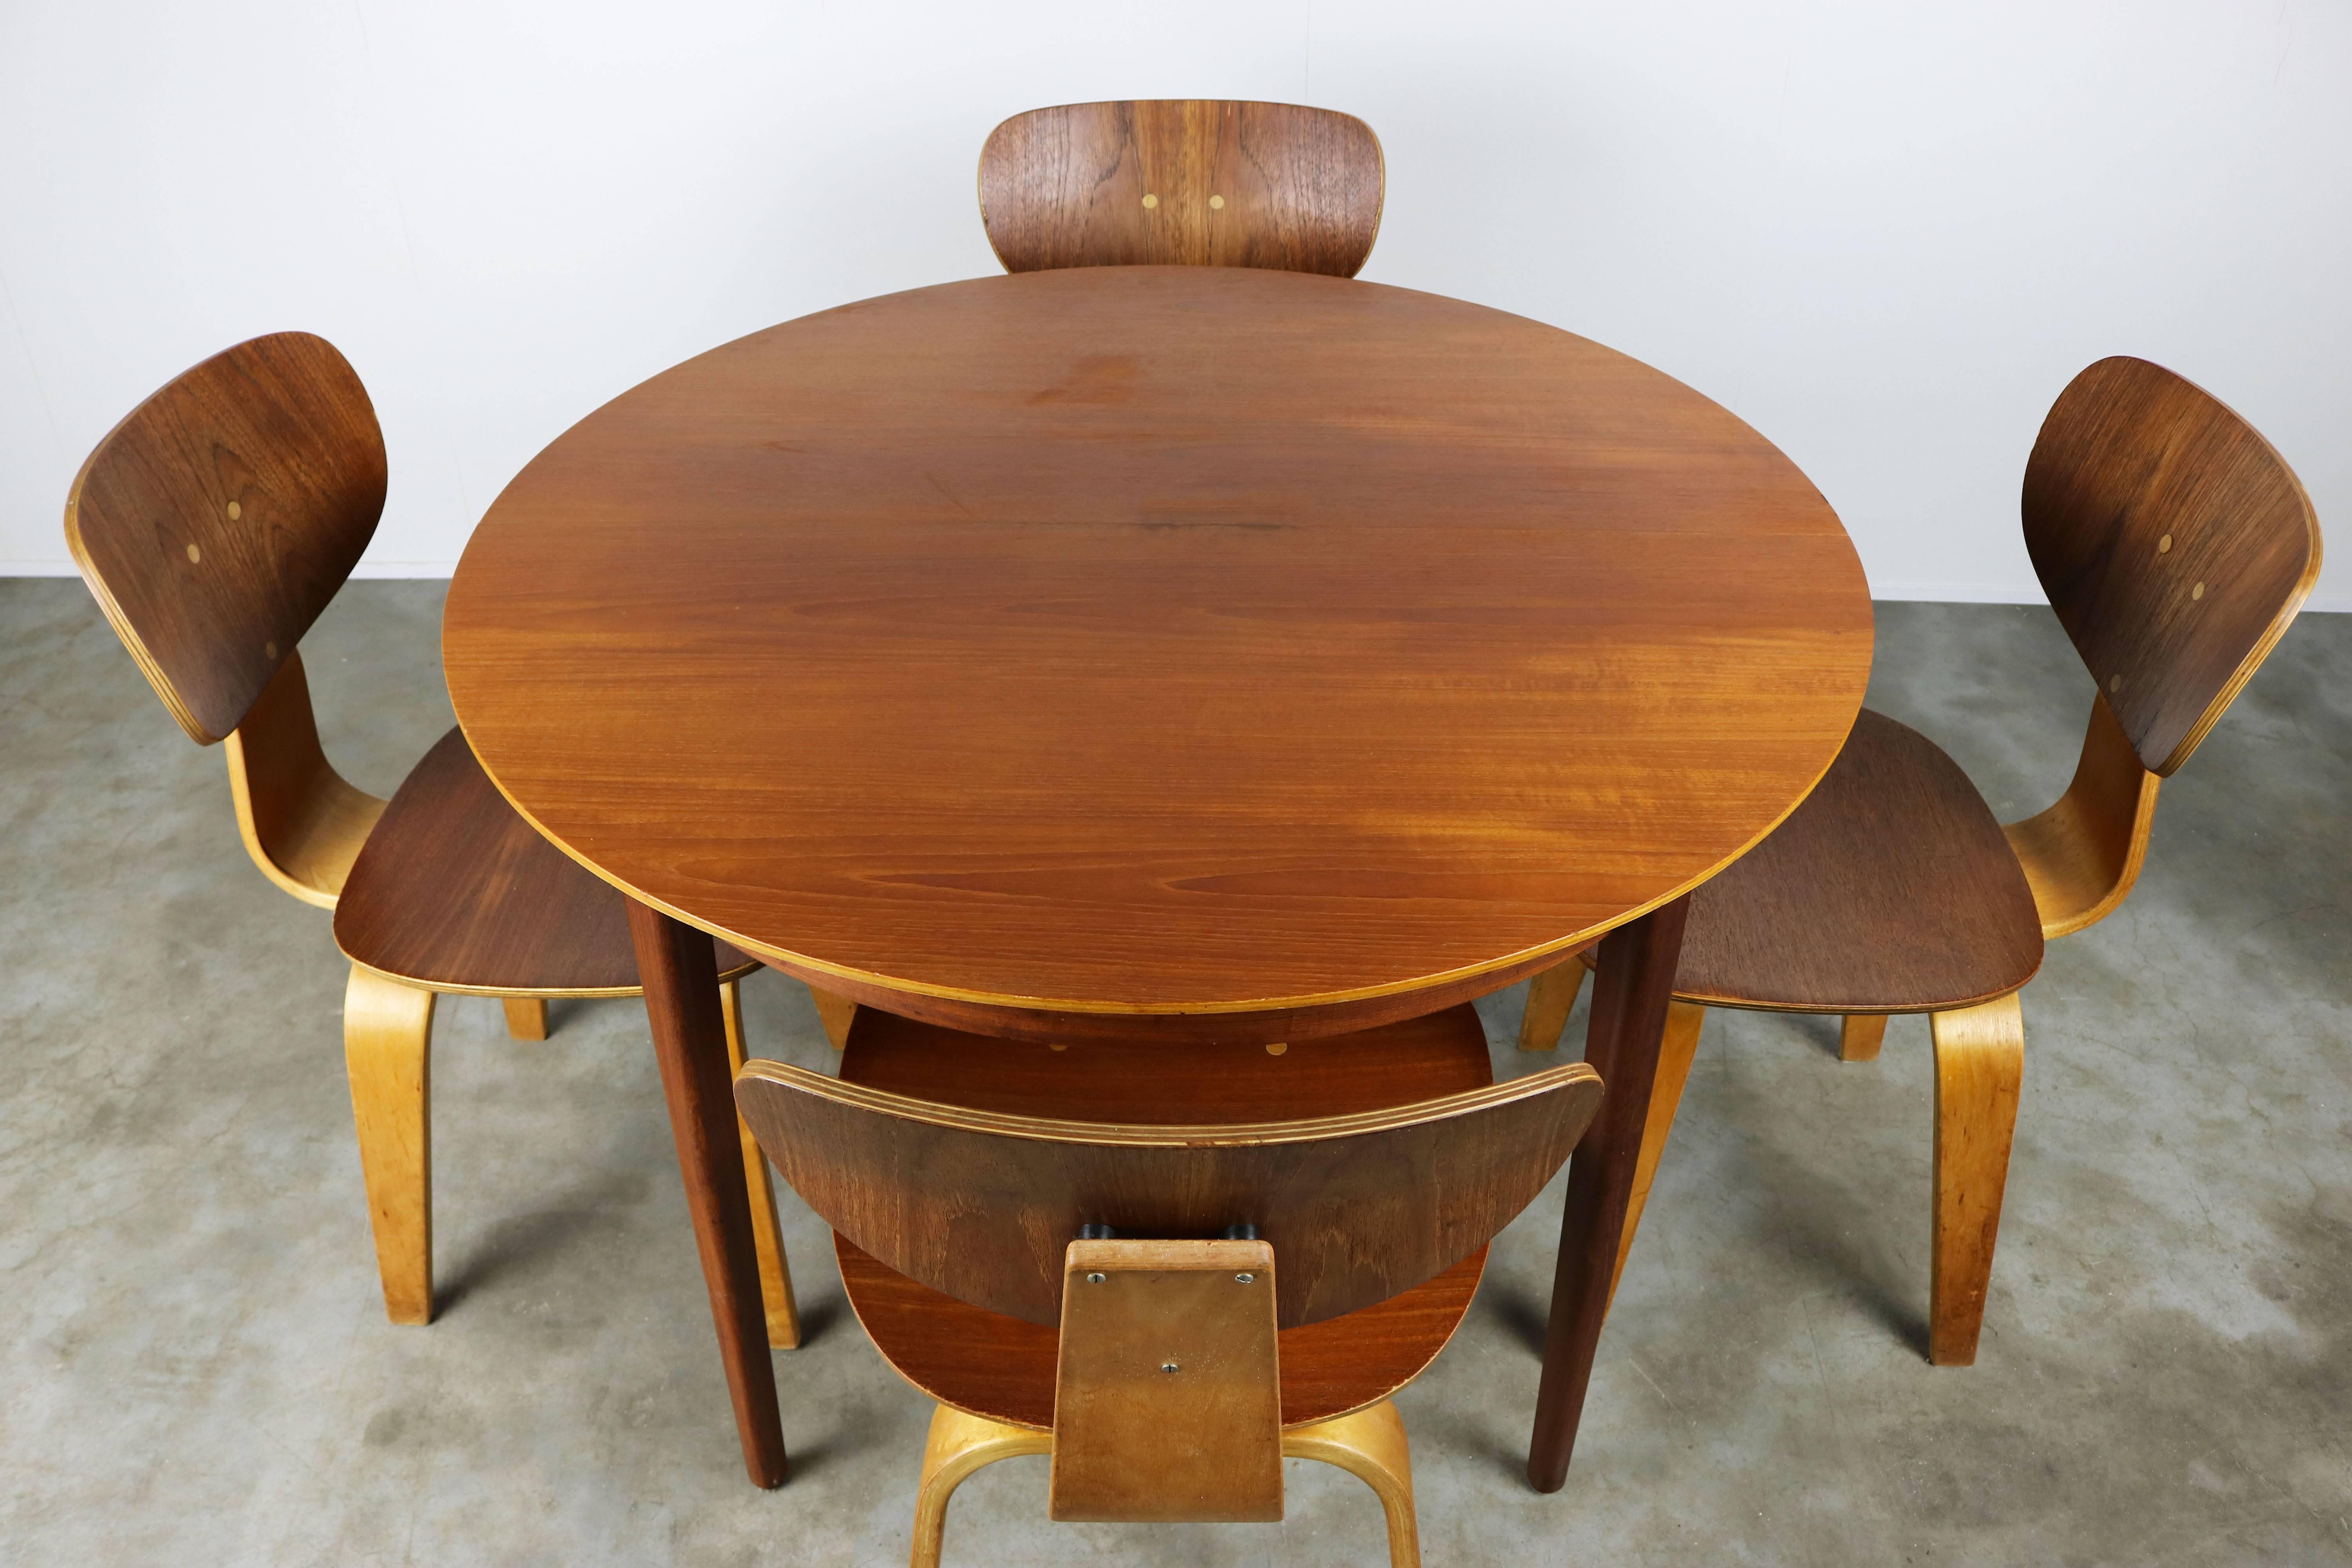 Wonderful Dutch design dining room set designed by Cees Braakman for UMS Pastoe 1952. The set consists of four iconic SB02 birch teak chairs and a matching TT05 teak extendable round table. Set is in great vintage condition with very little traces